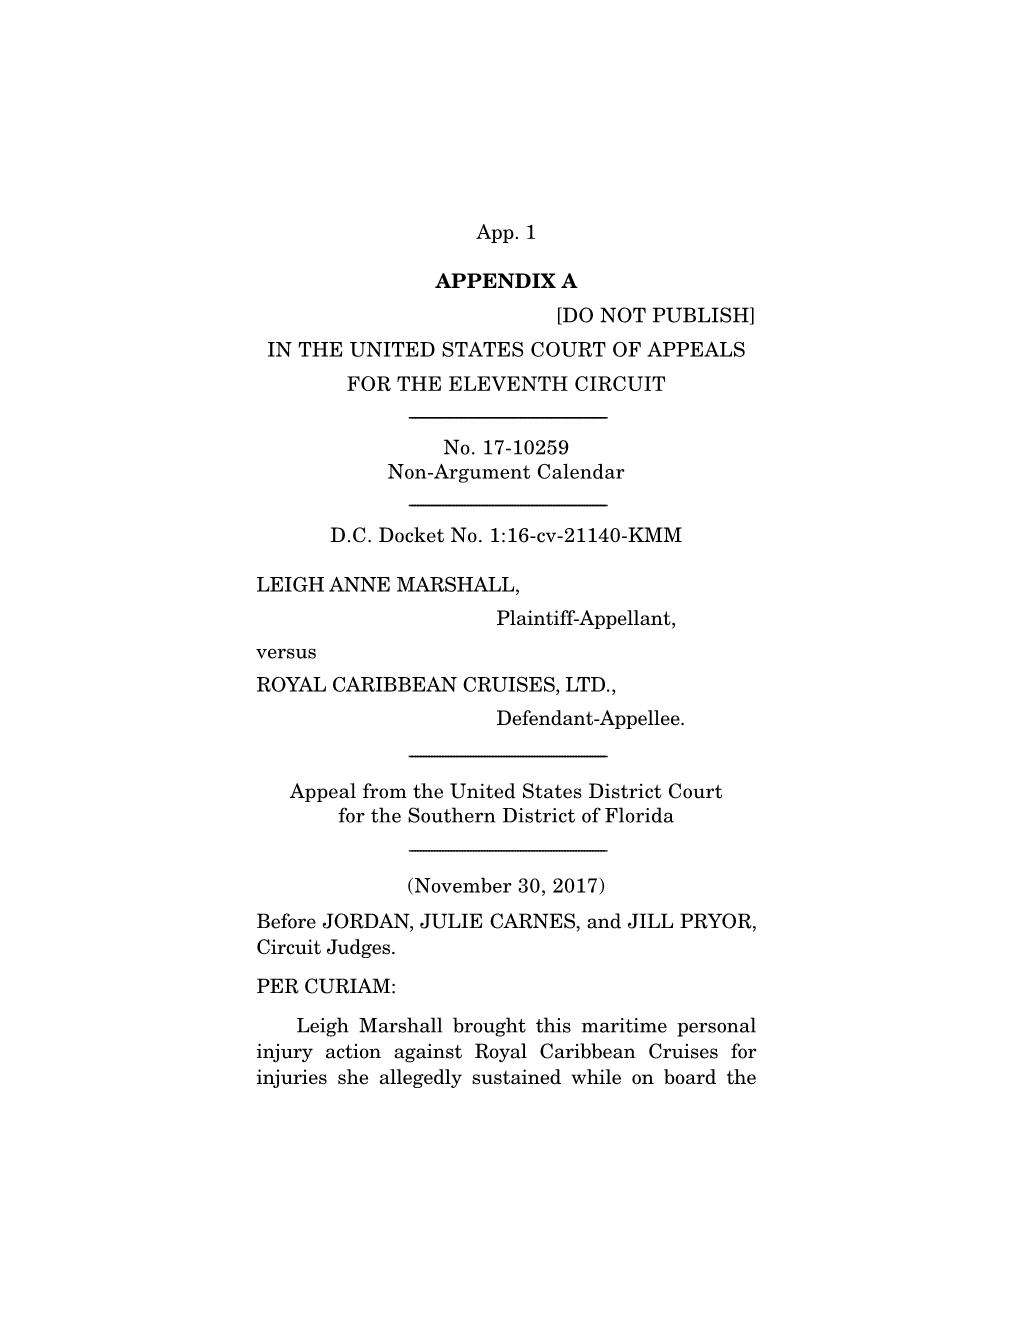 App. 1 APPENDIX a [DO NOT PUBLISH] in the UNITED STATES